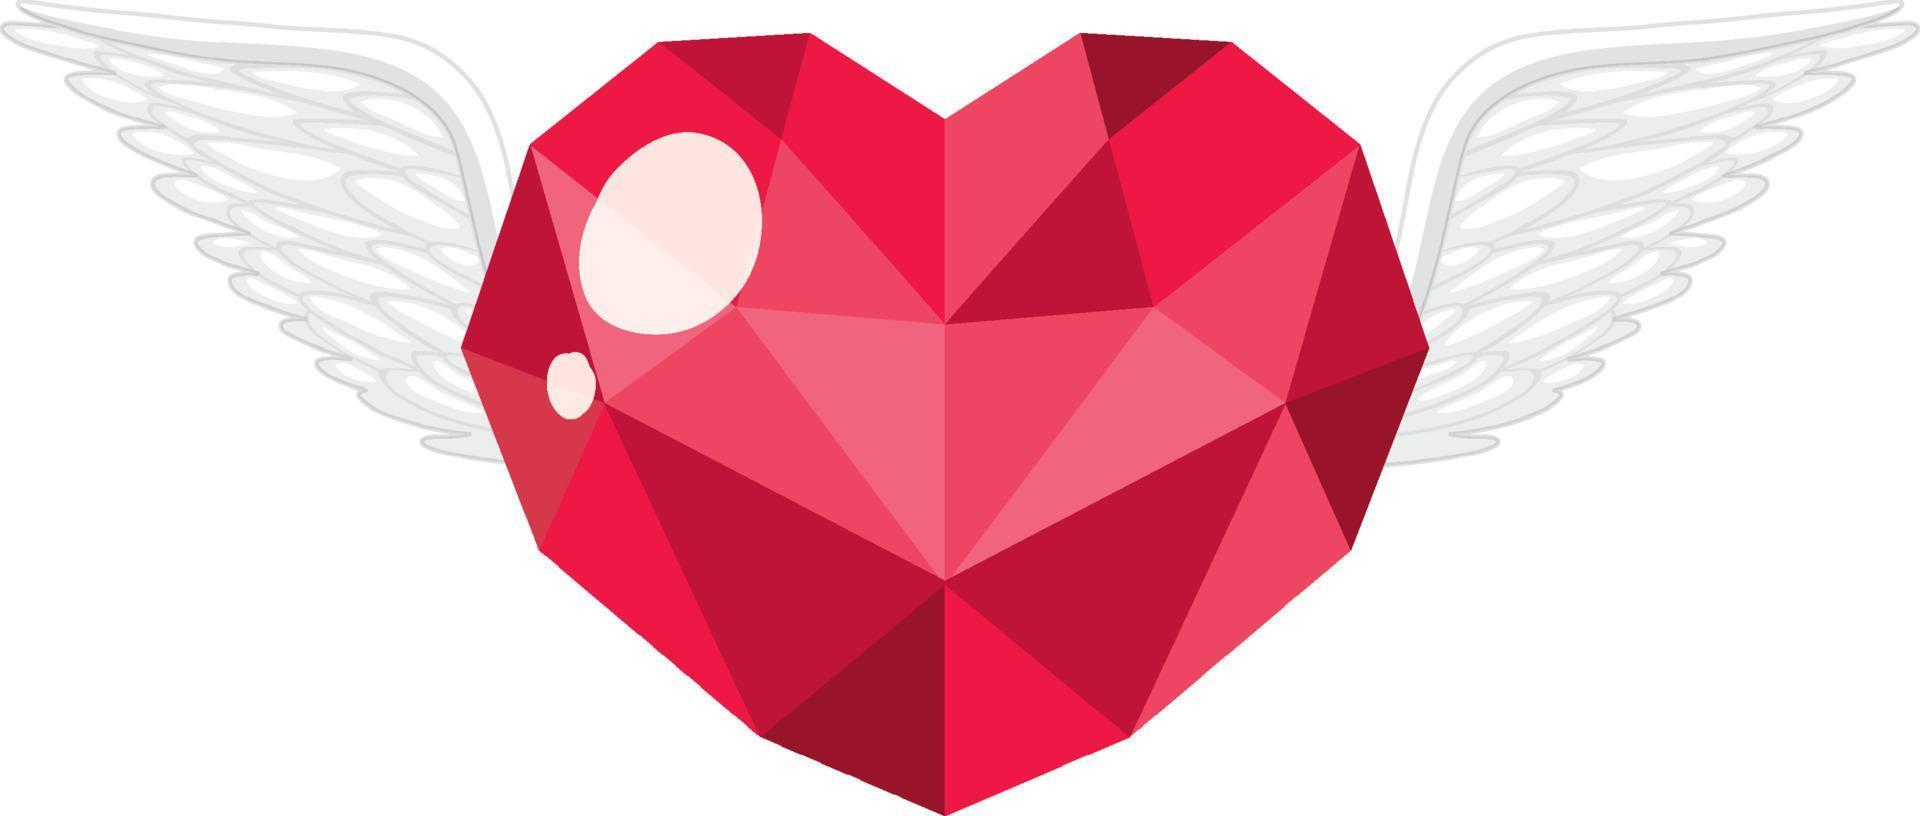 Red diamond heart with wings vector